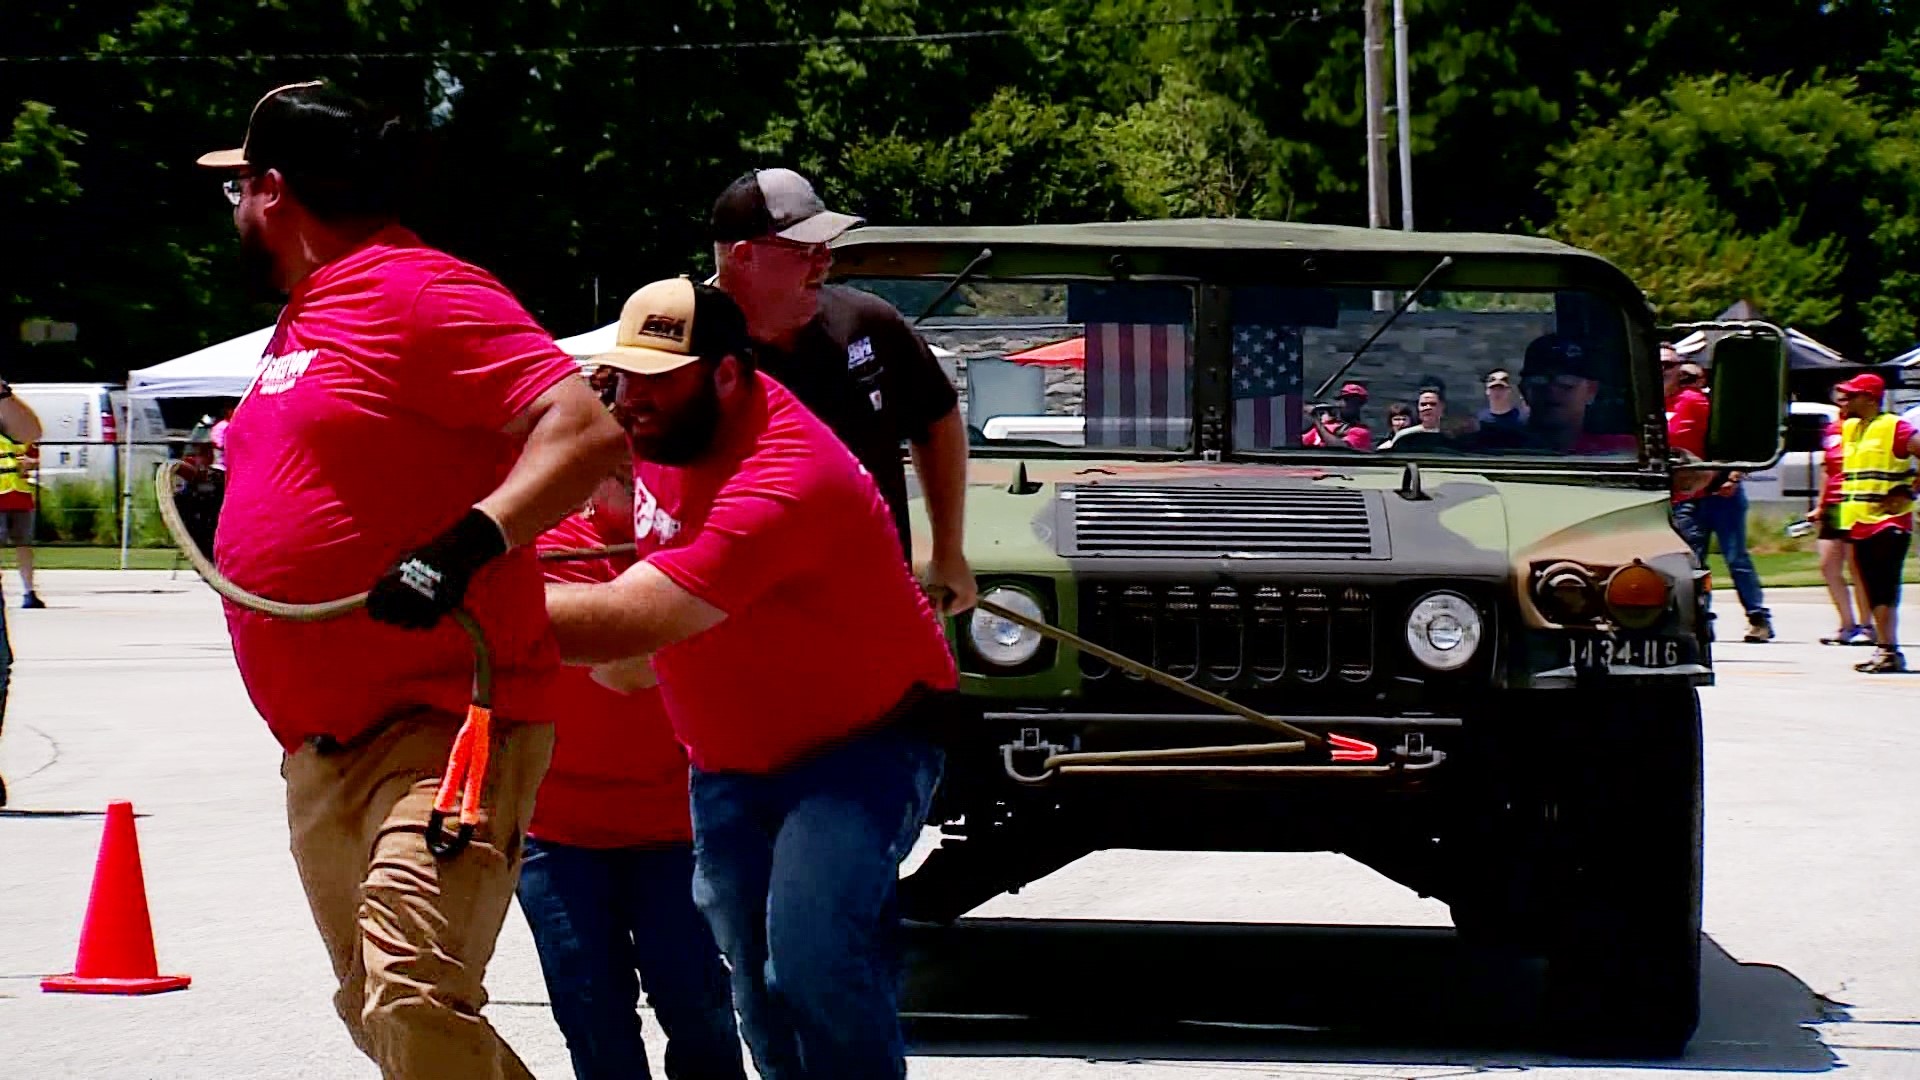 The fundraiser competition consisted of teams pulling military vehicles, including planes and Humvees.